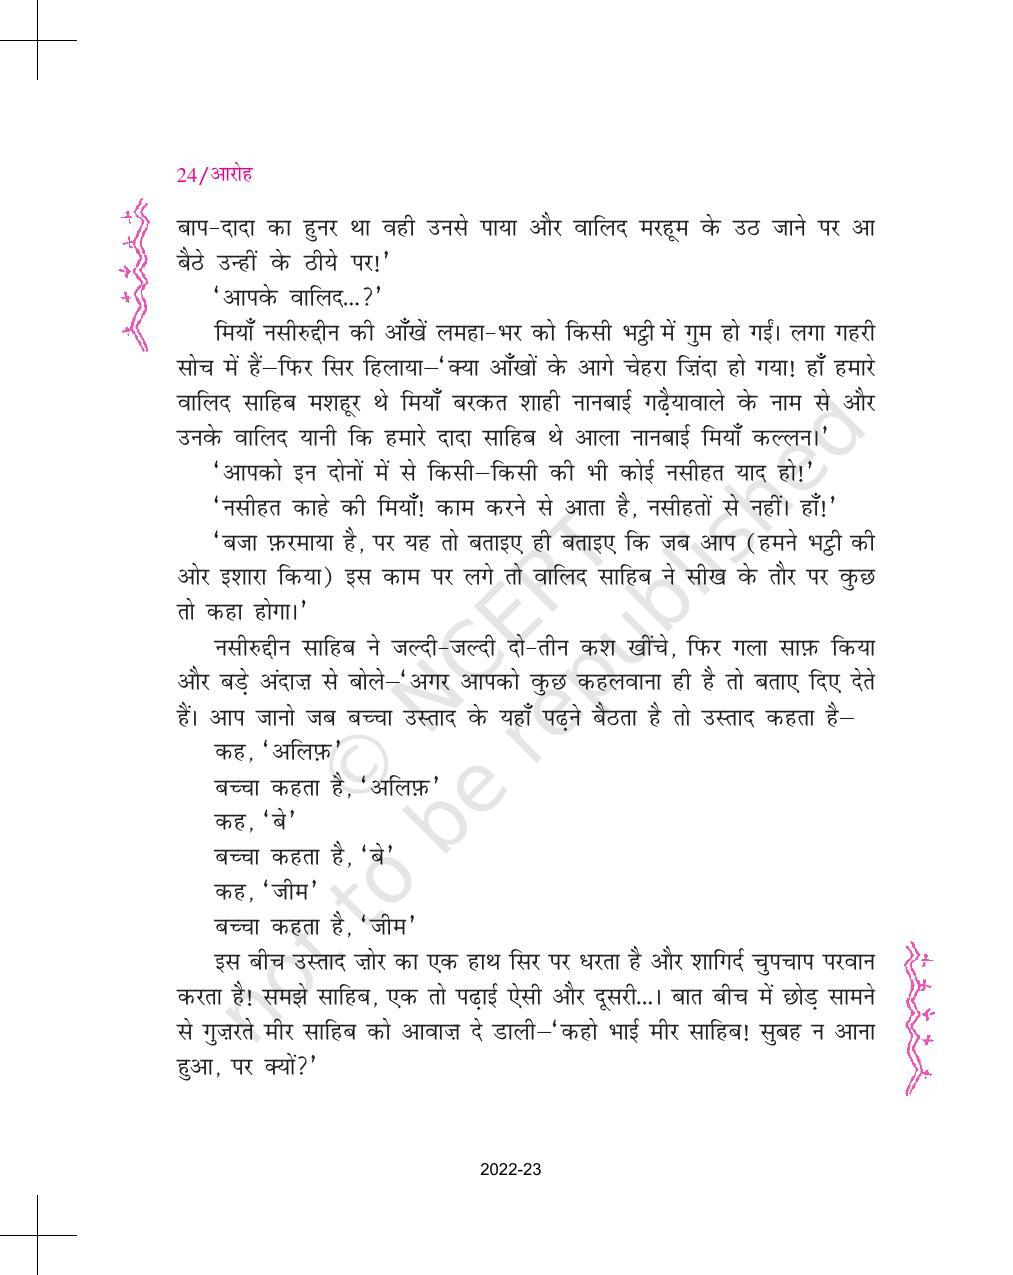 NCERT Book for Class 11 Hindi Aroh Chapter 2 मियाँ नसीरुद्दीन - Page 5